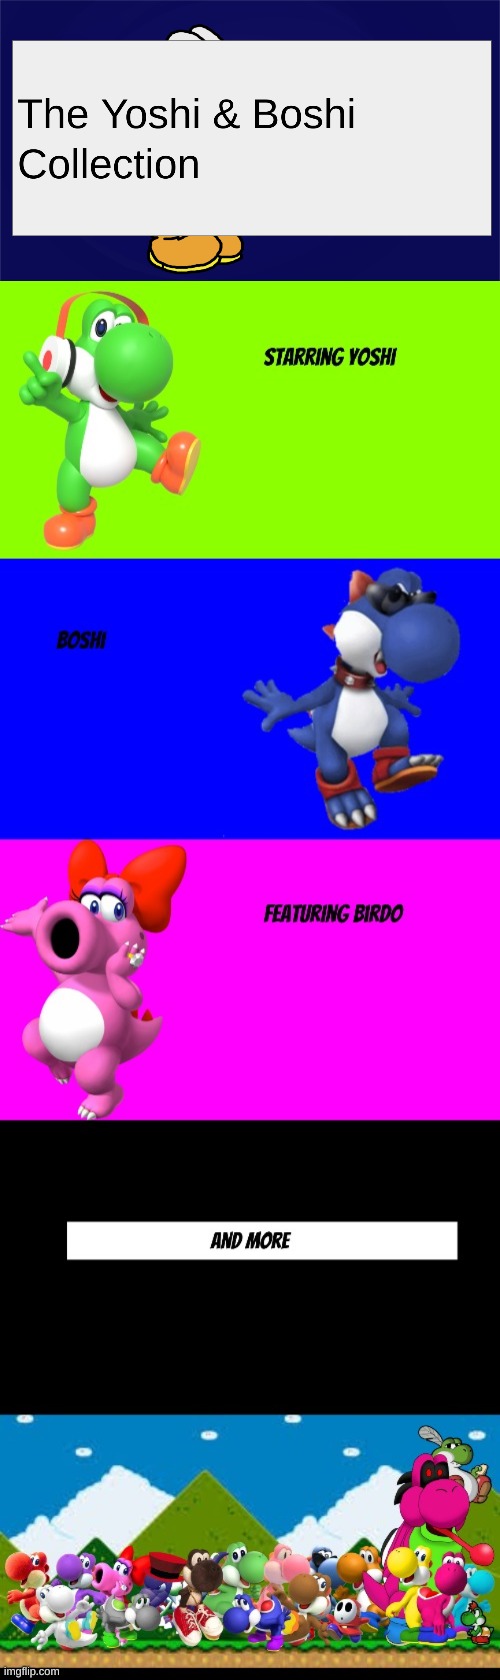 The Yoshi & Boshi Collection Intro(For MEMES_OVERLOAD) | made w/ Imgflip meme maker